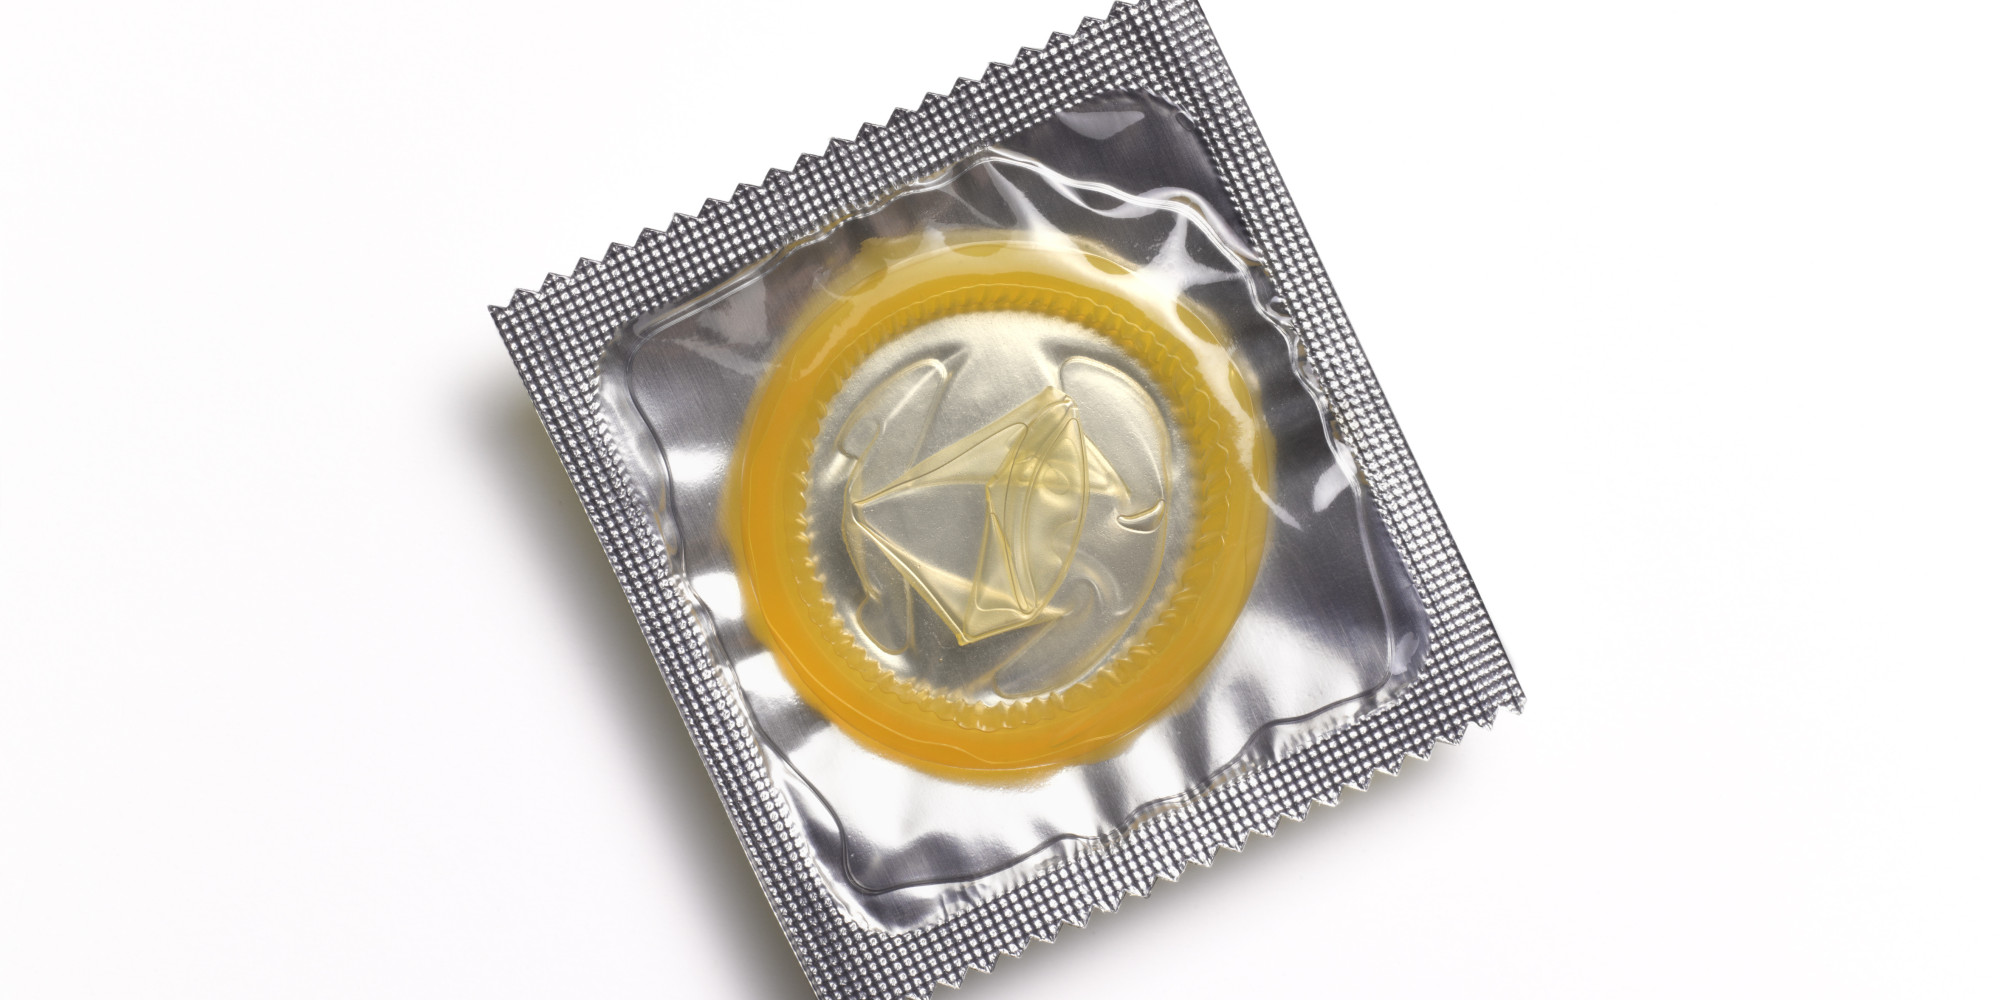 The Most Important Thing To Look For When Buying Condoms